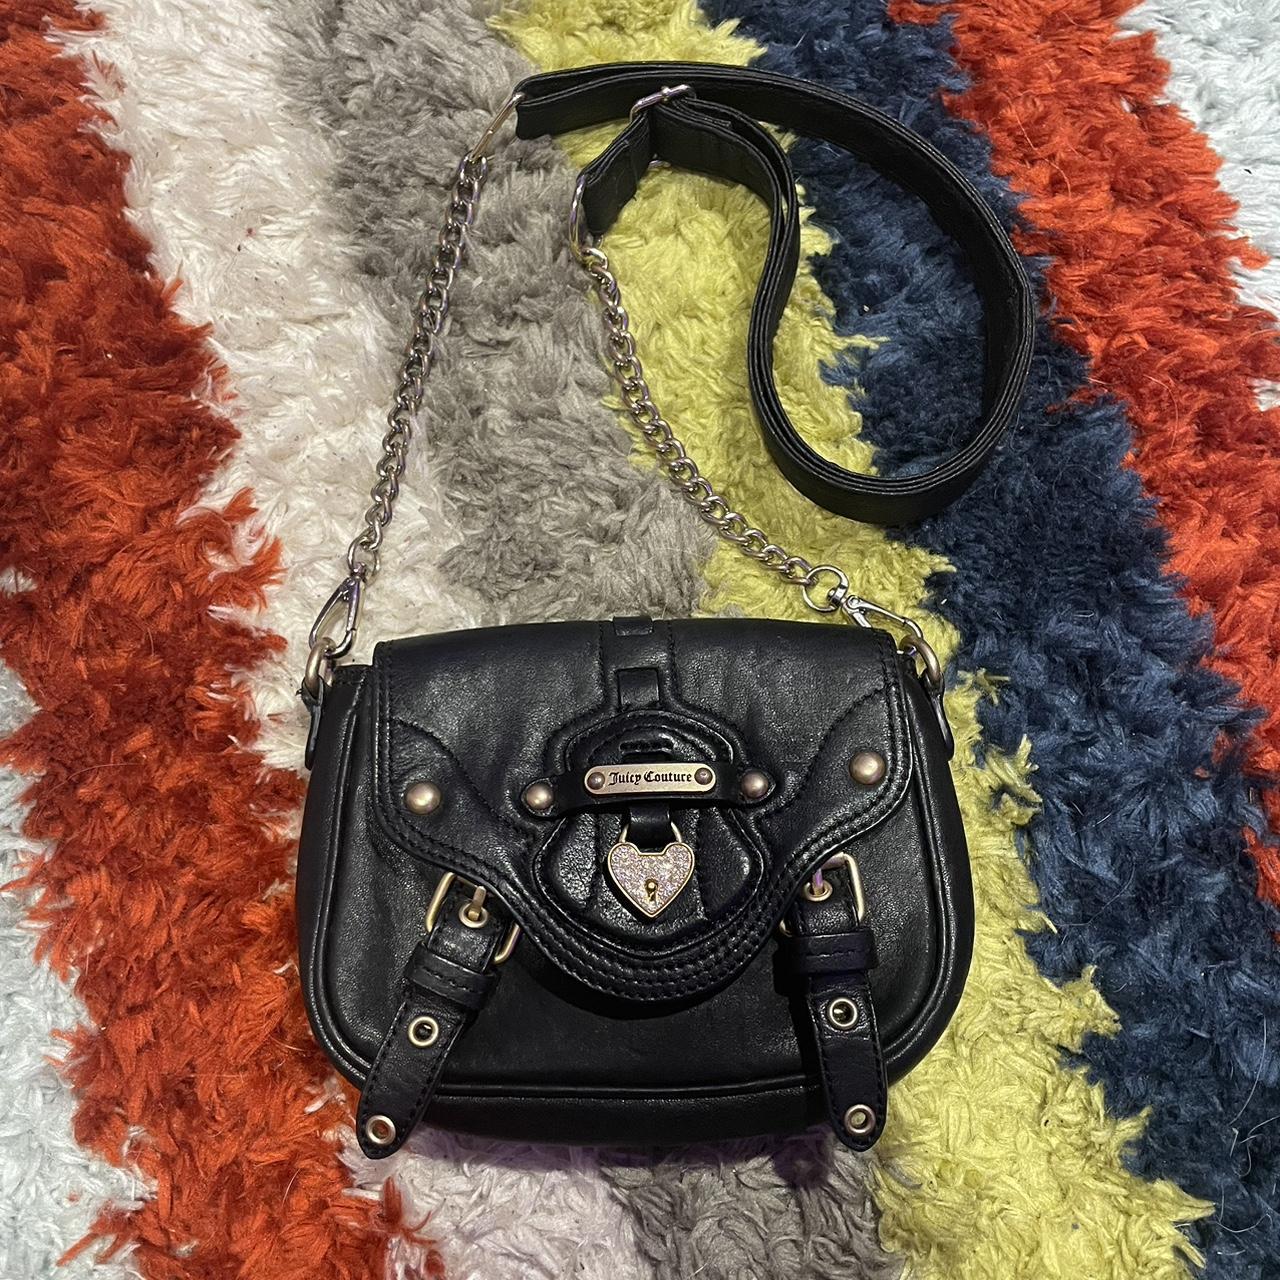 Zadig & Voltaire cross body black leather bag with - Depop